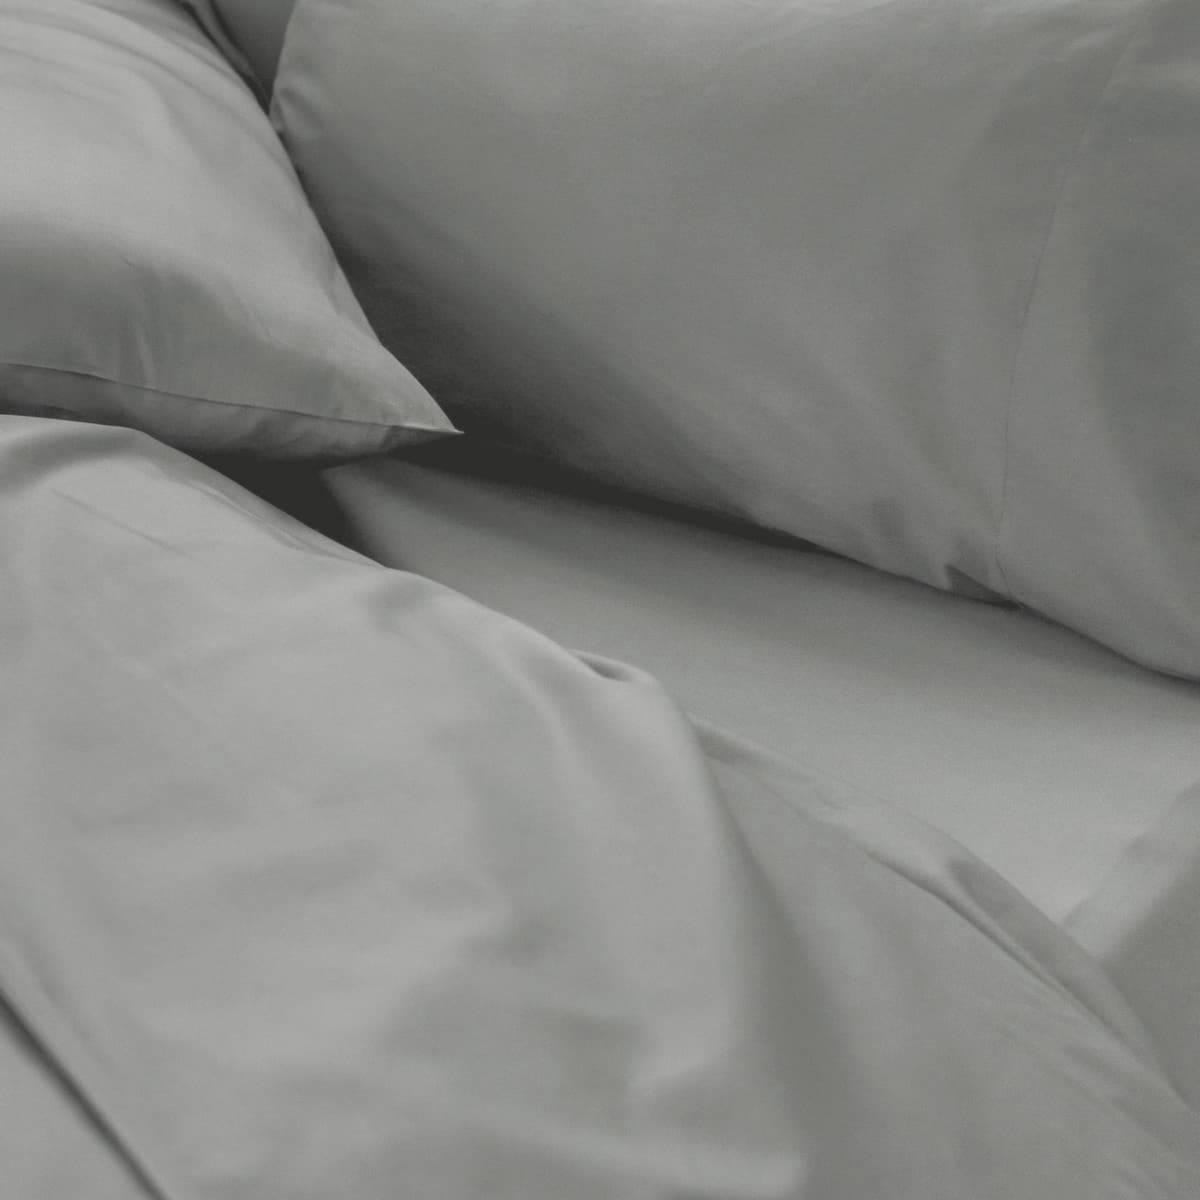 If Only Home Luxury Organic Sheet Set - Charcoal Grey